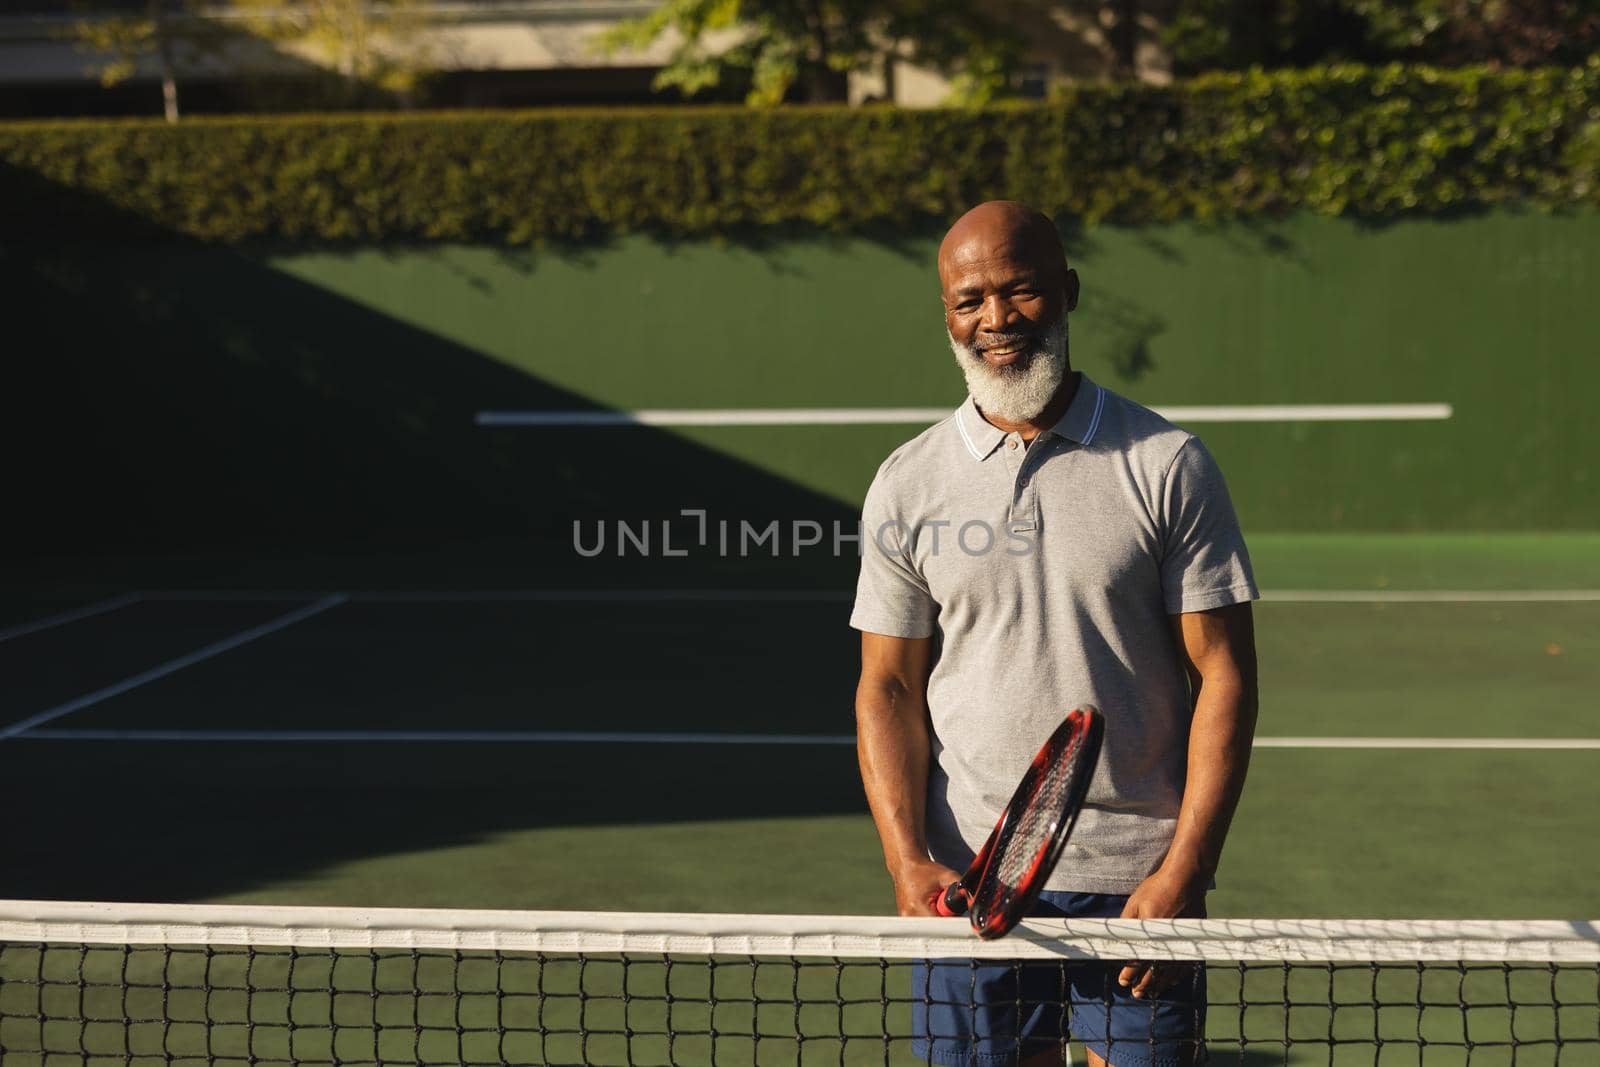 Portrait of smiling senior african american man holding tennis racket on tennis court. retirement and active senior lifestyle concept.